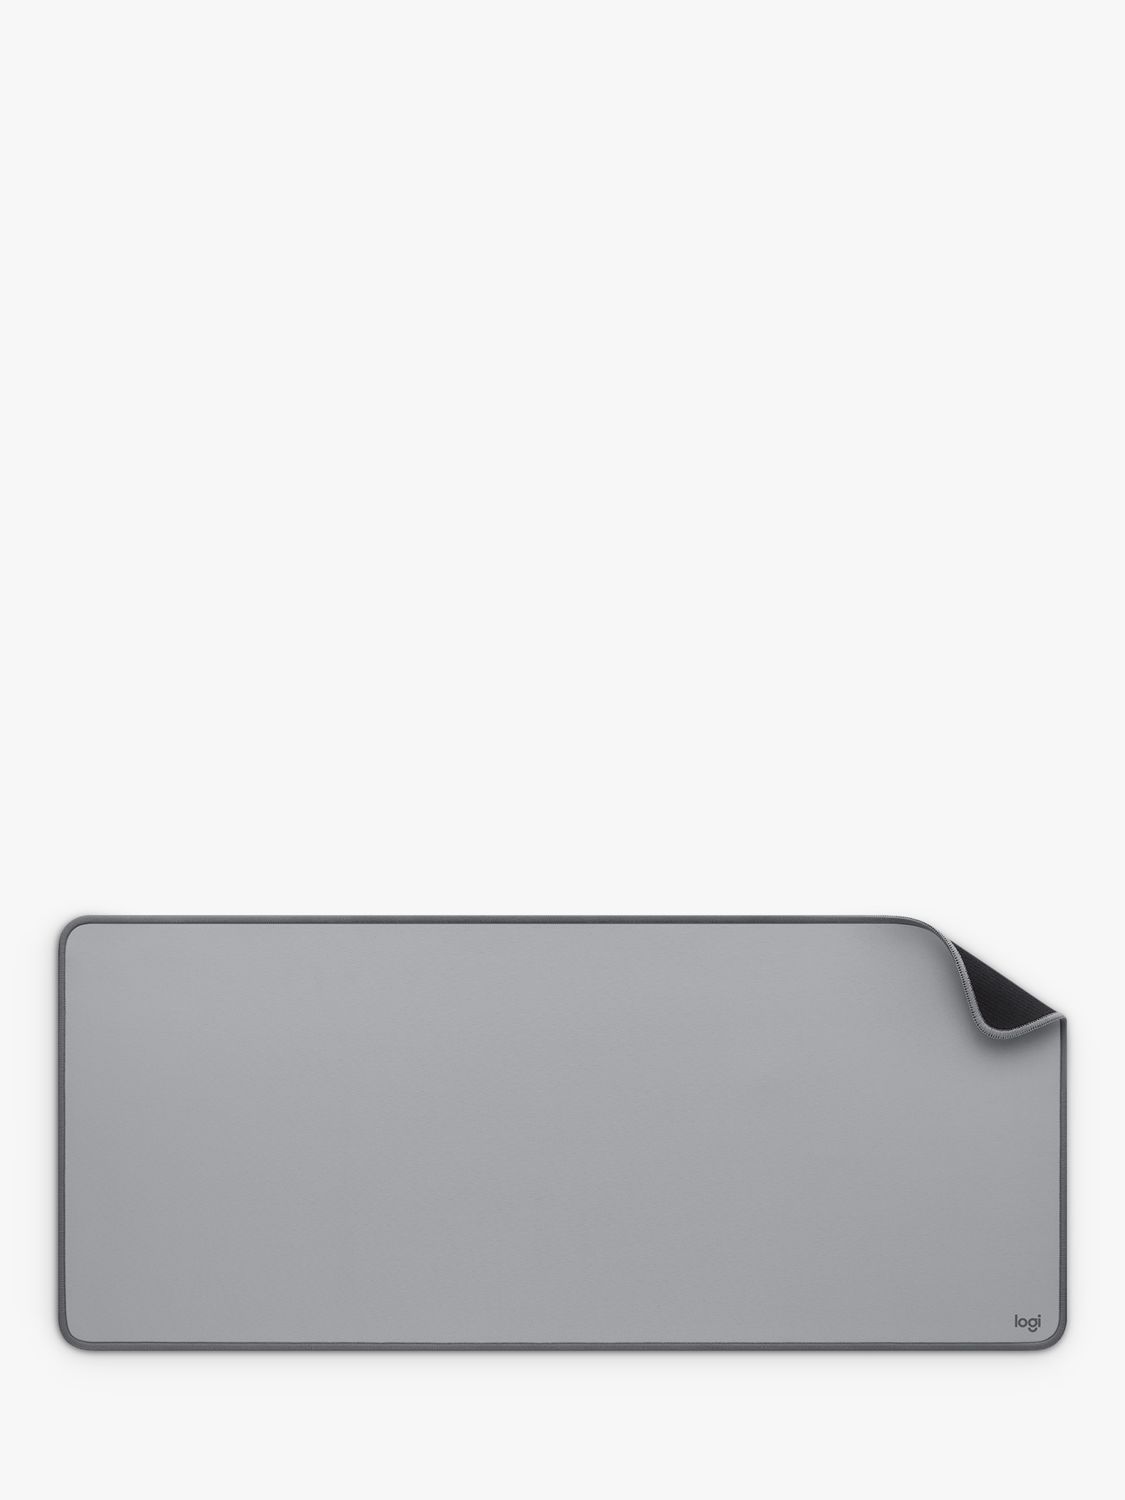 Let's unbox the logitech desk mat in gray! I'm planning to make a